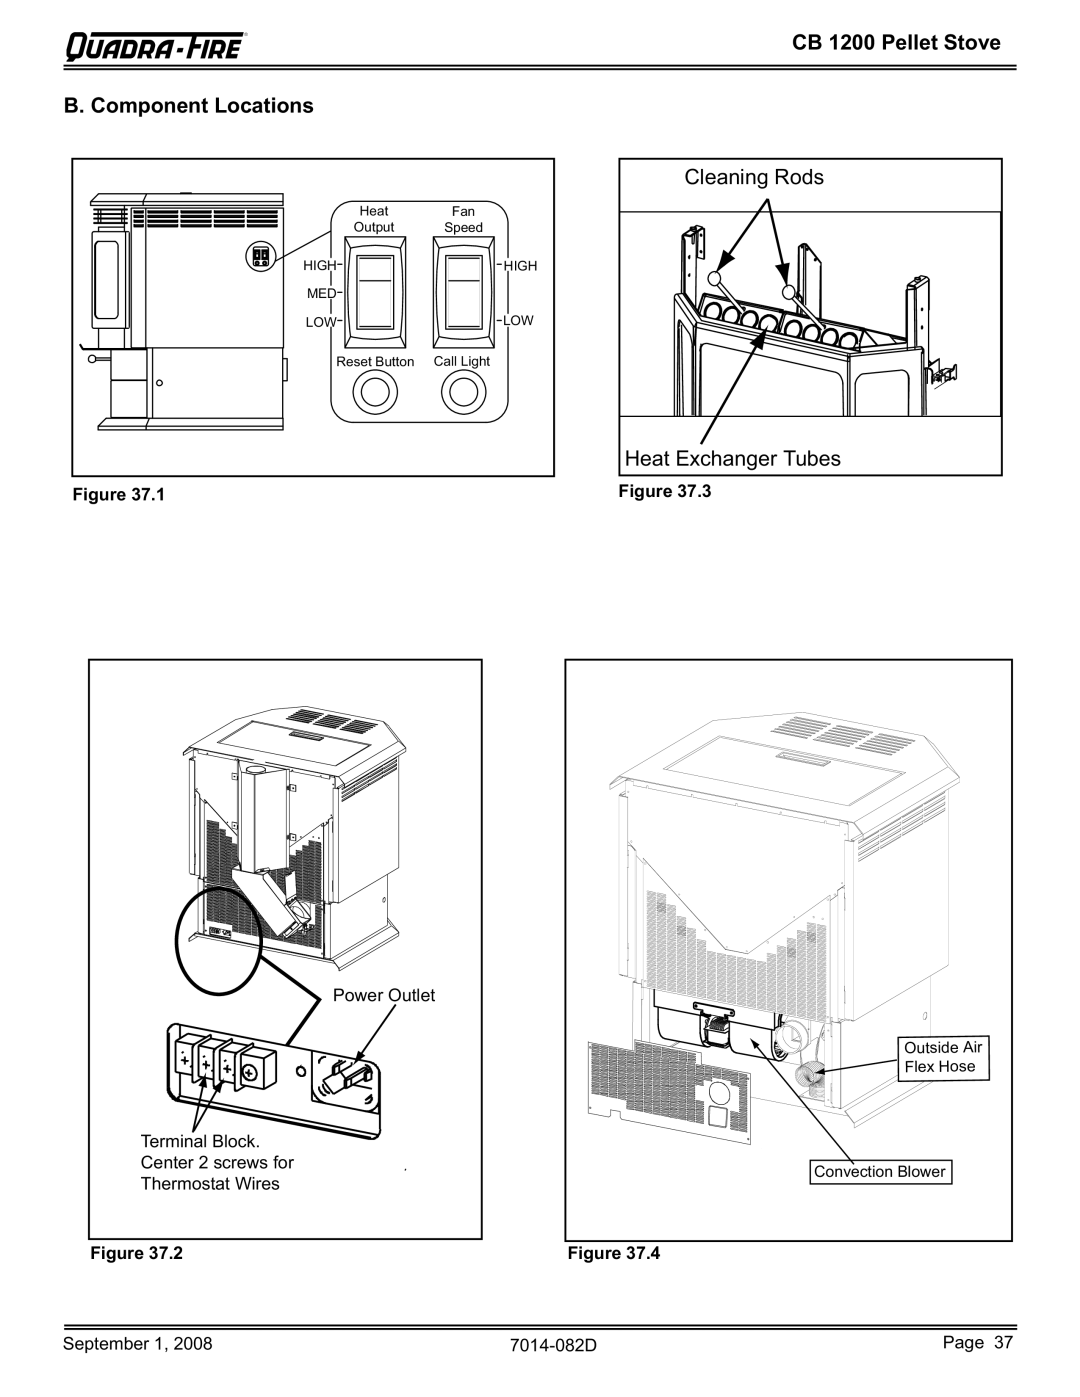 Hearth and Home Technologies CB1200-B owner manual CB 1200 Pellet Stove Component Locations 